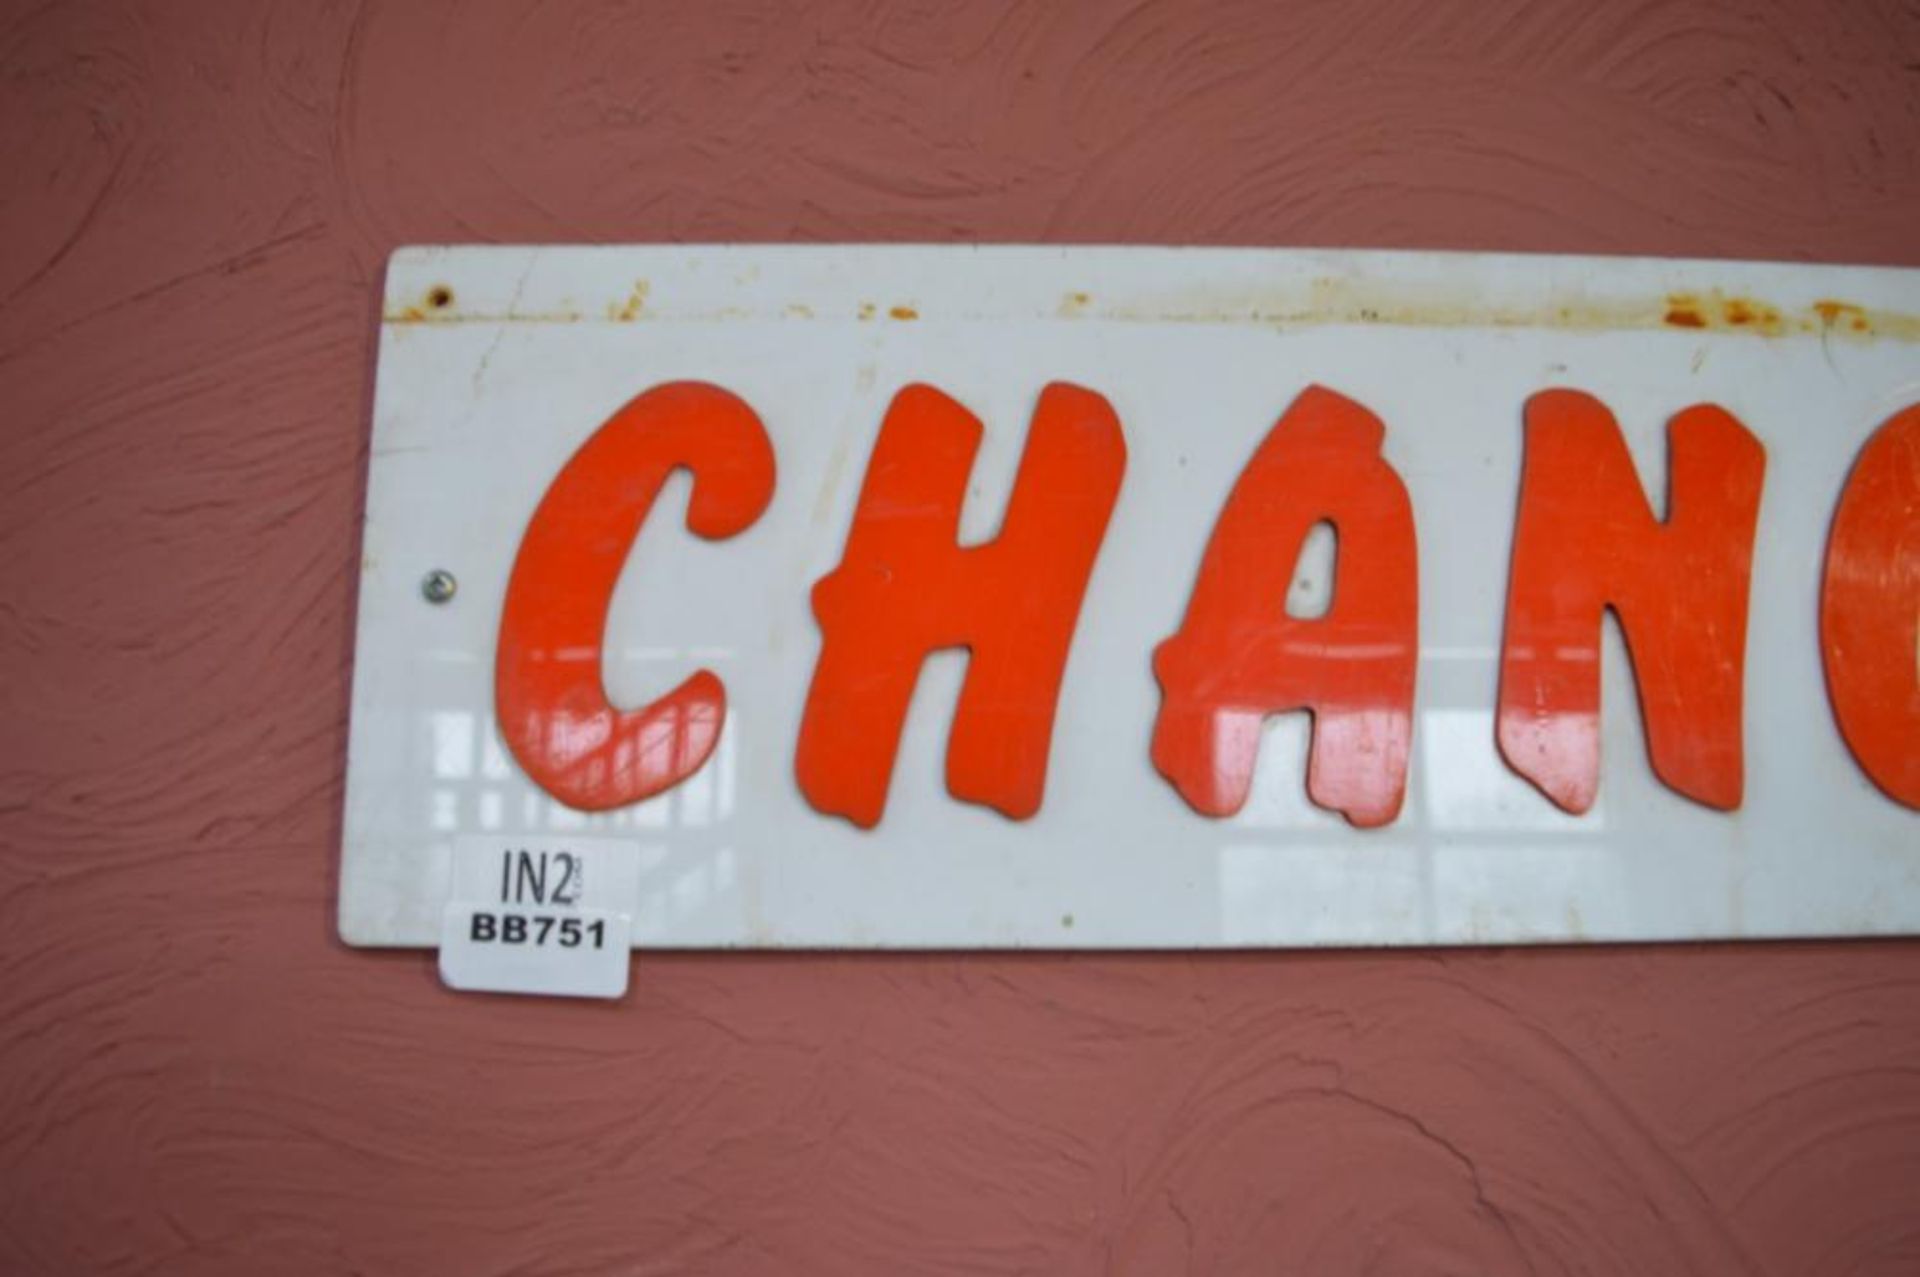 1 x Vintage Acrylic Arcade "Change" Notice Sign - 8 x 24 Inches - Ref BB751 - CL351 - Location: Chor - Image 2 of 3